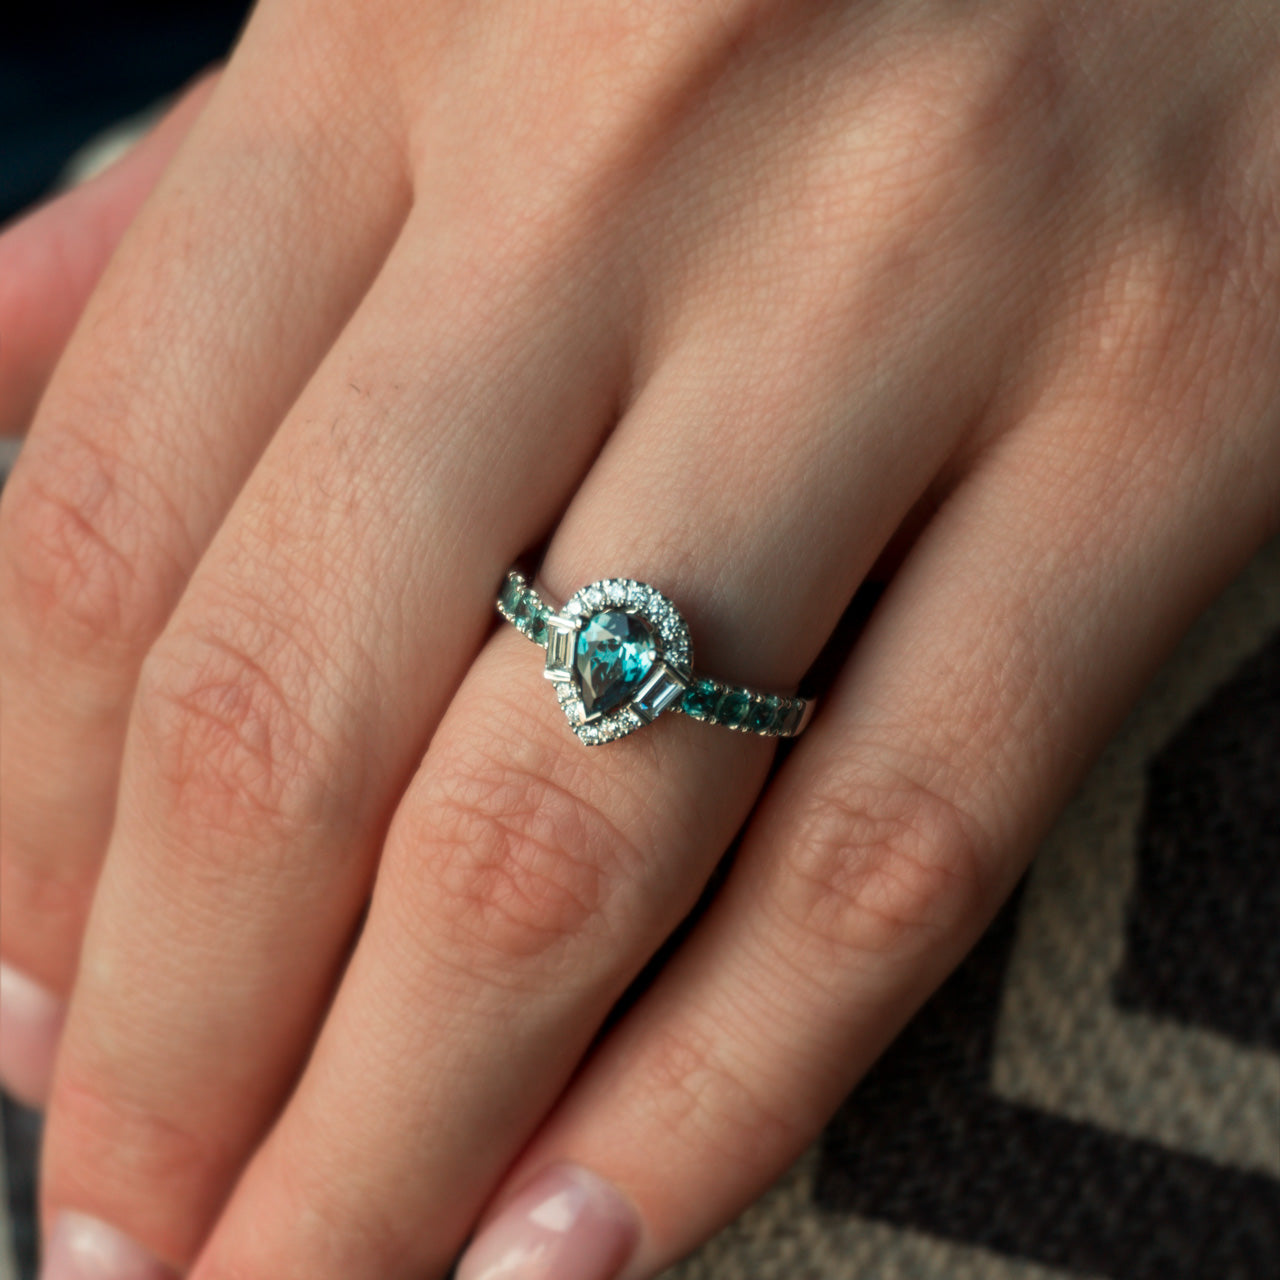 A woman's hand displaying a platinum ring with a 0.57ct alexandrite that appears blue under certain lighting